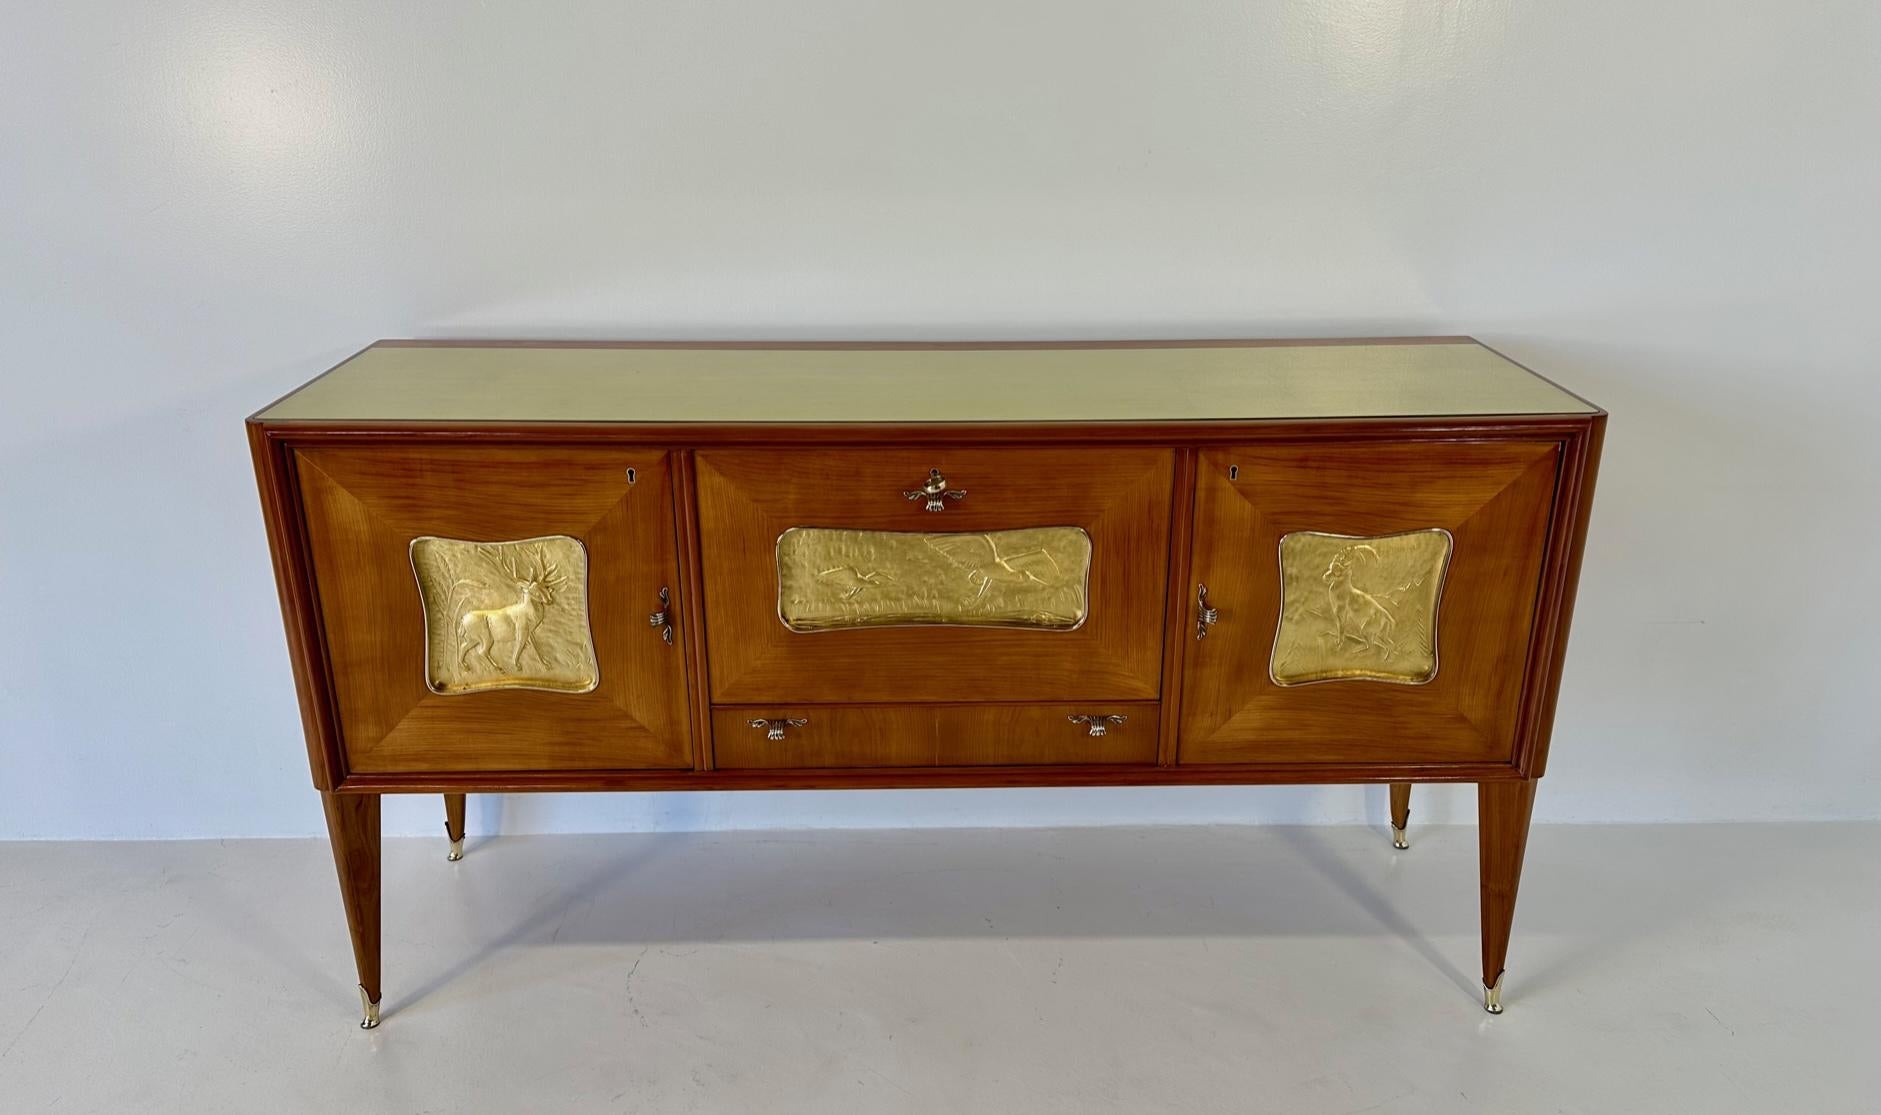 This sideboard was produced in Italy in the 1940s.
It is completely made of cherry wood with three decorations depicting animals in carved solid wood and covered in gold leaf. 
In the central door there is a dry bar. 
The details and the tips are